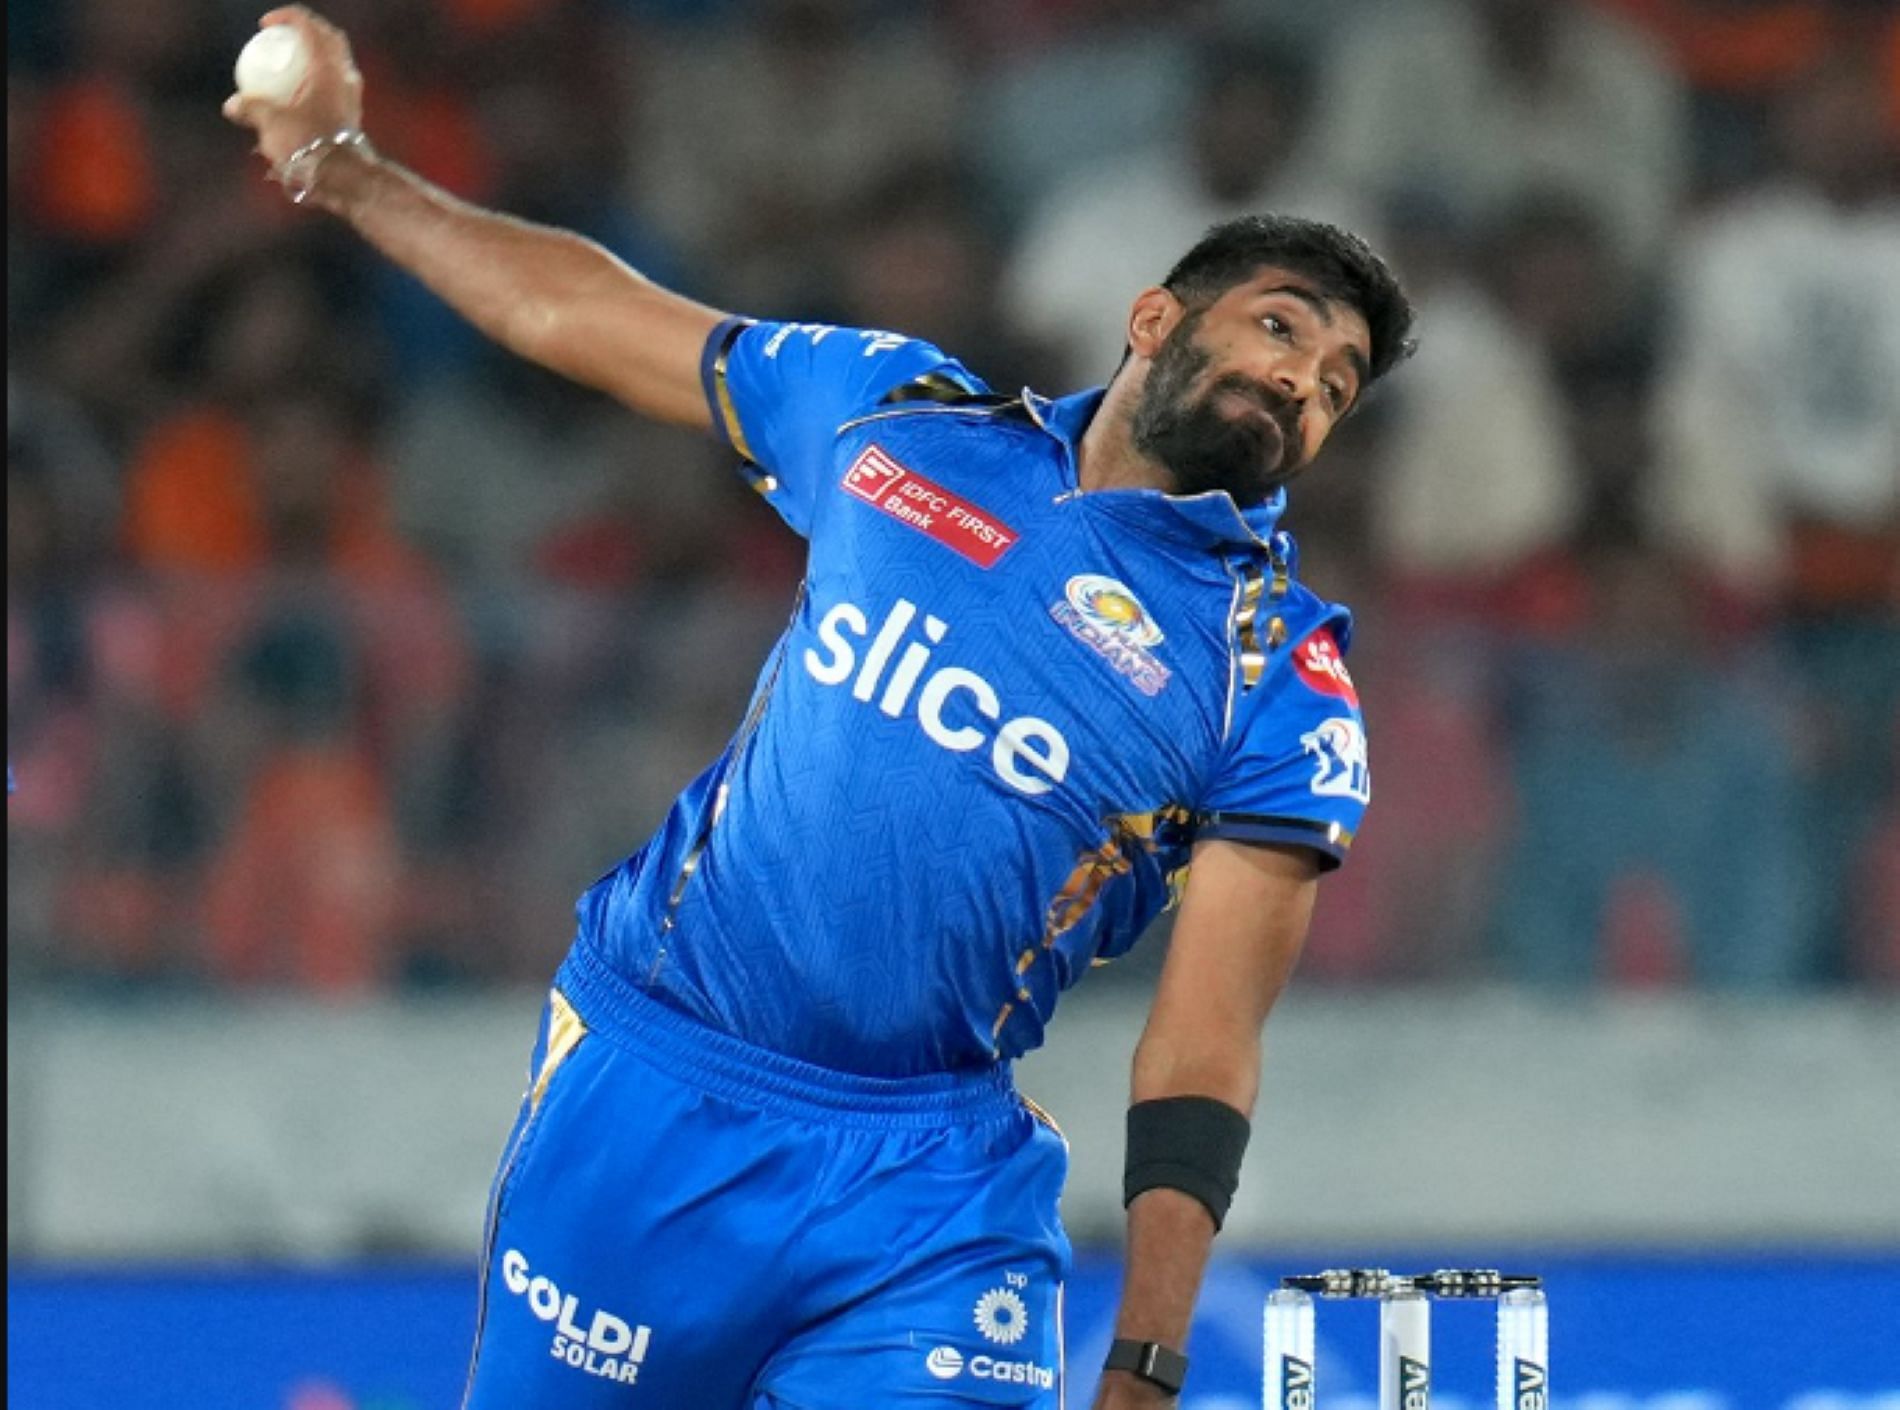 Even Bumrah could not stop the flurry of boundaries against SRH [Credit: MI Twitter handle]